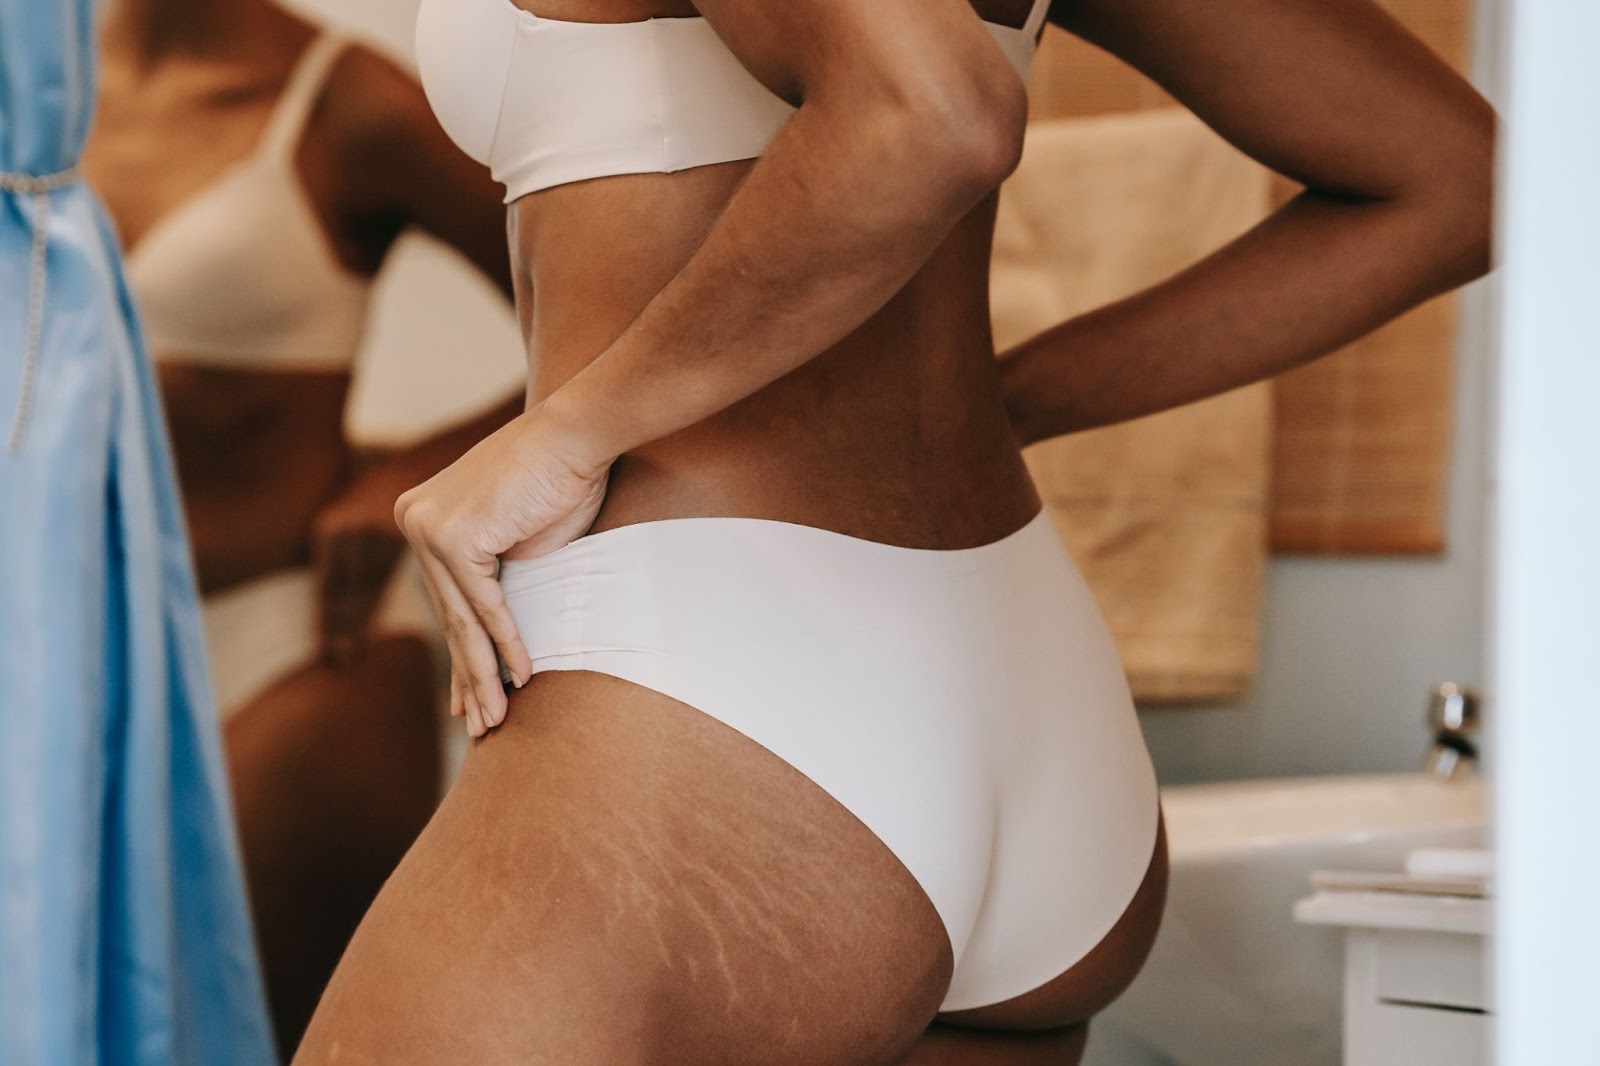 Pimple on Butt: How to Identify and Treat Butt Bumps